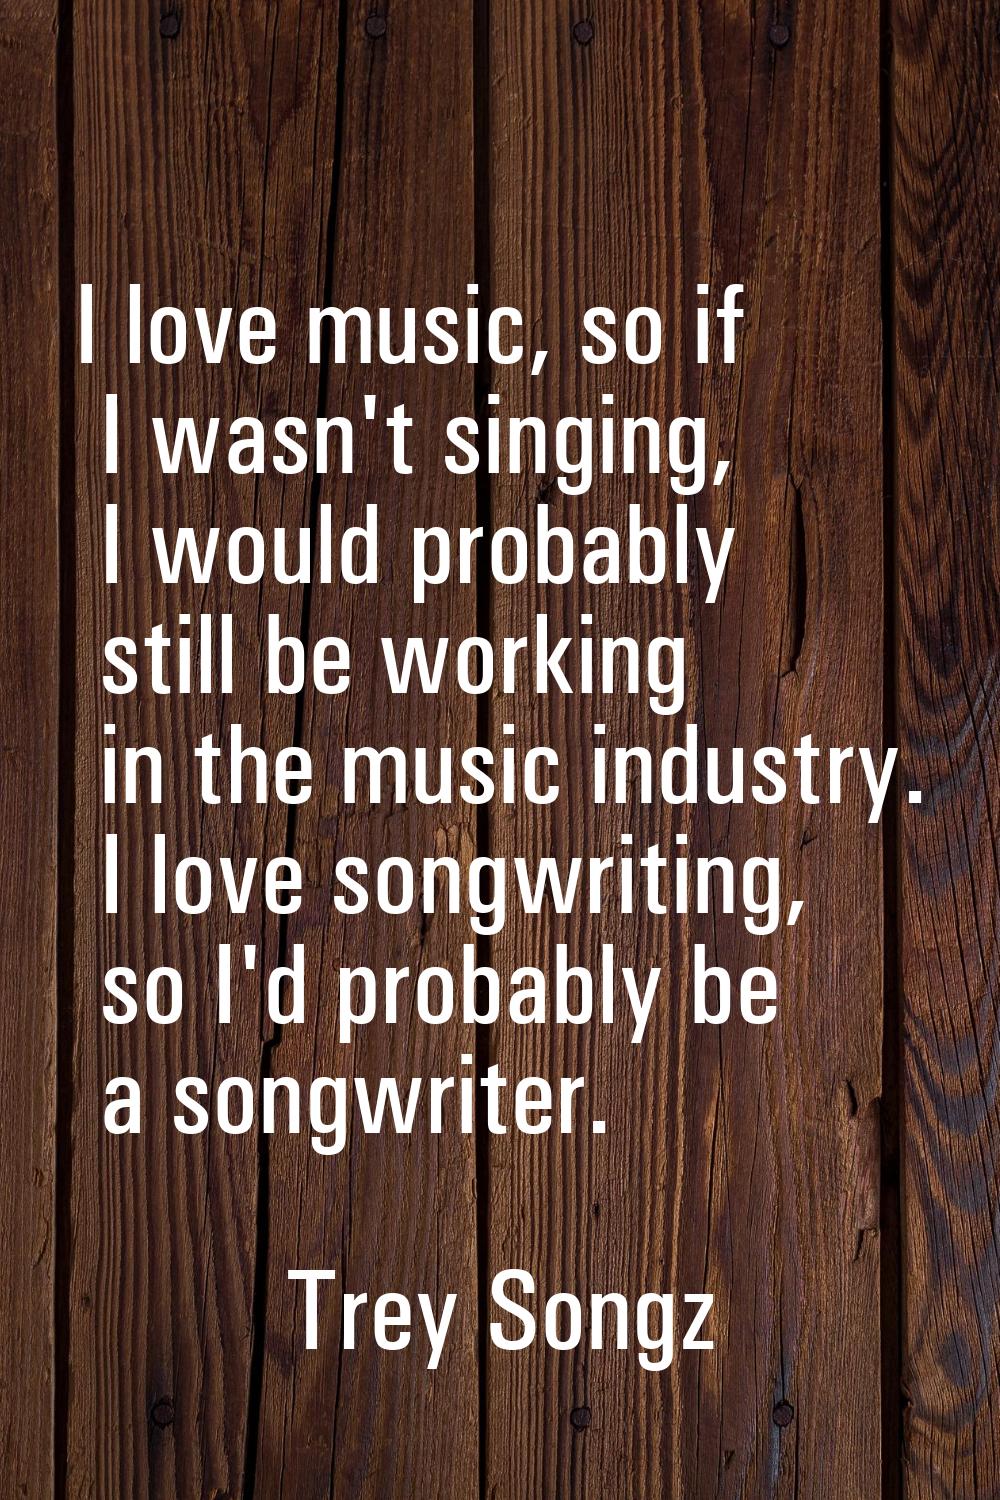 I love music, so if I wasn't singing, I would probably still be working in the music industry. I lo